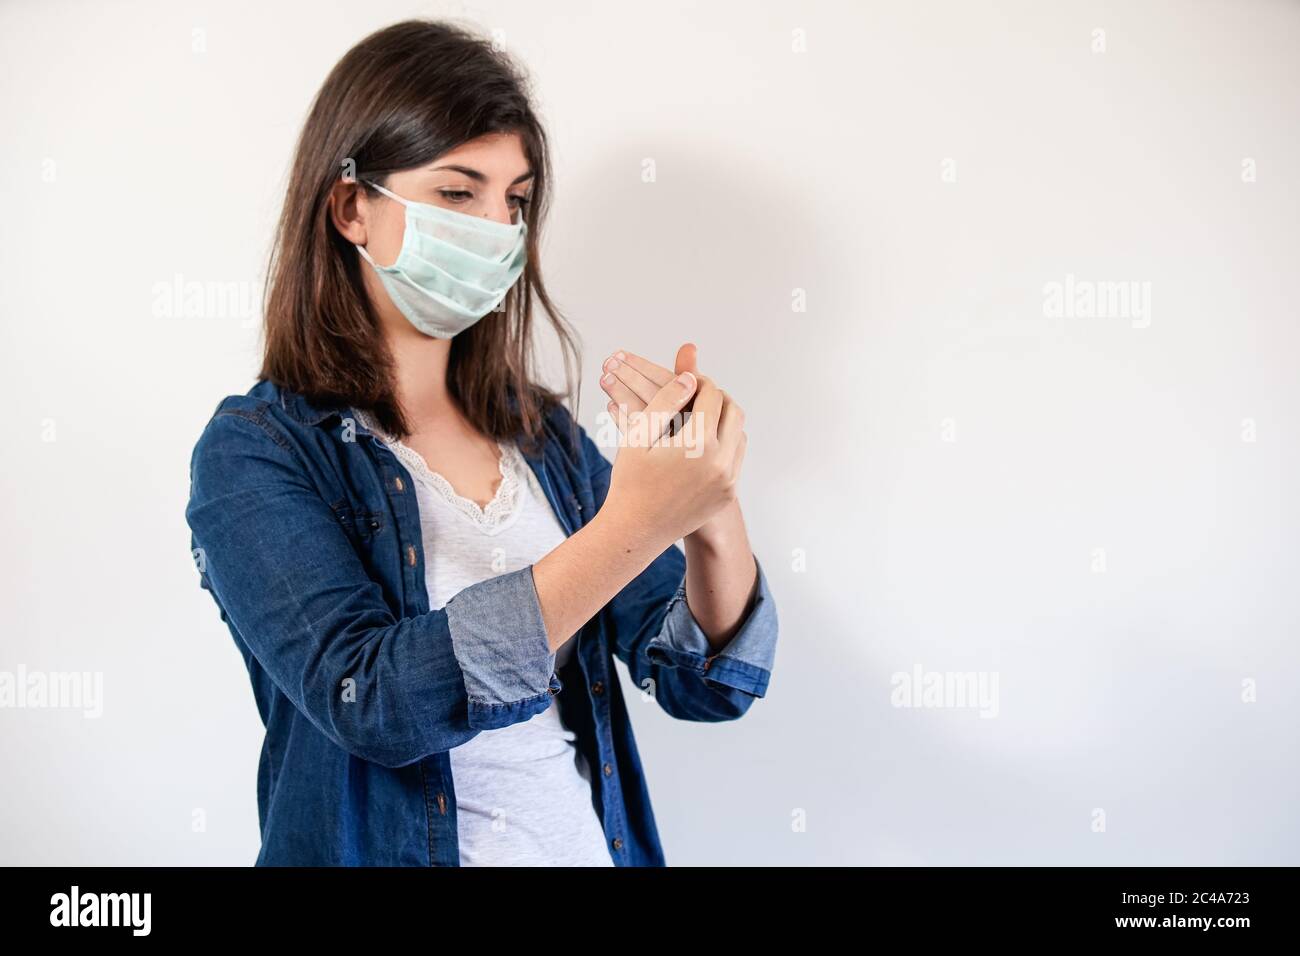 Woman with medical protection mask putting on antiseptic to disinfect her hands Stock Photo